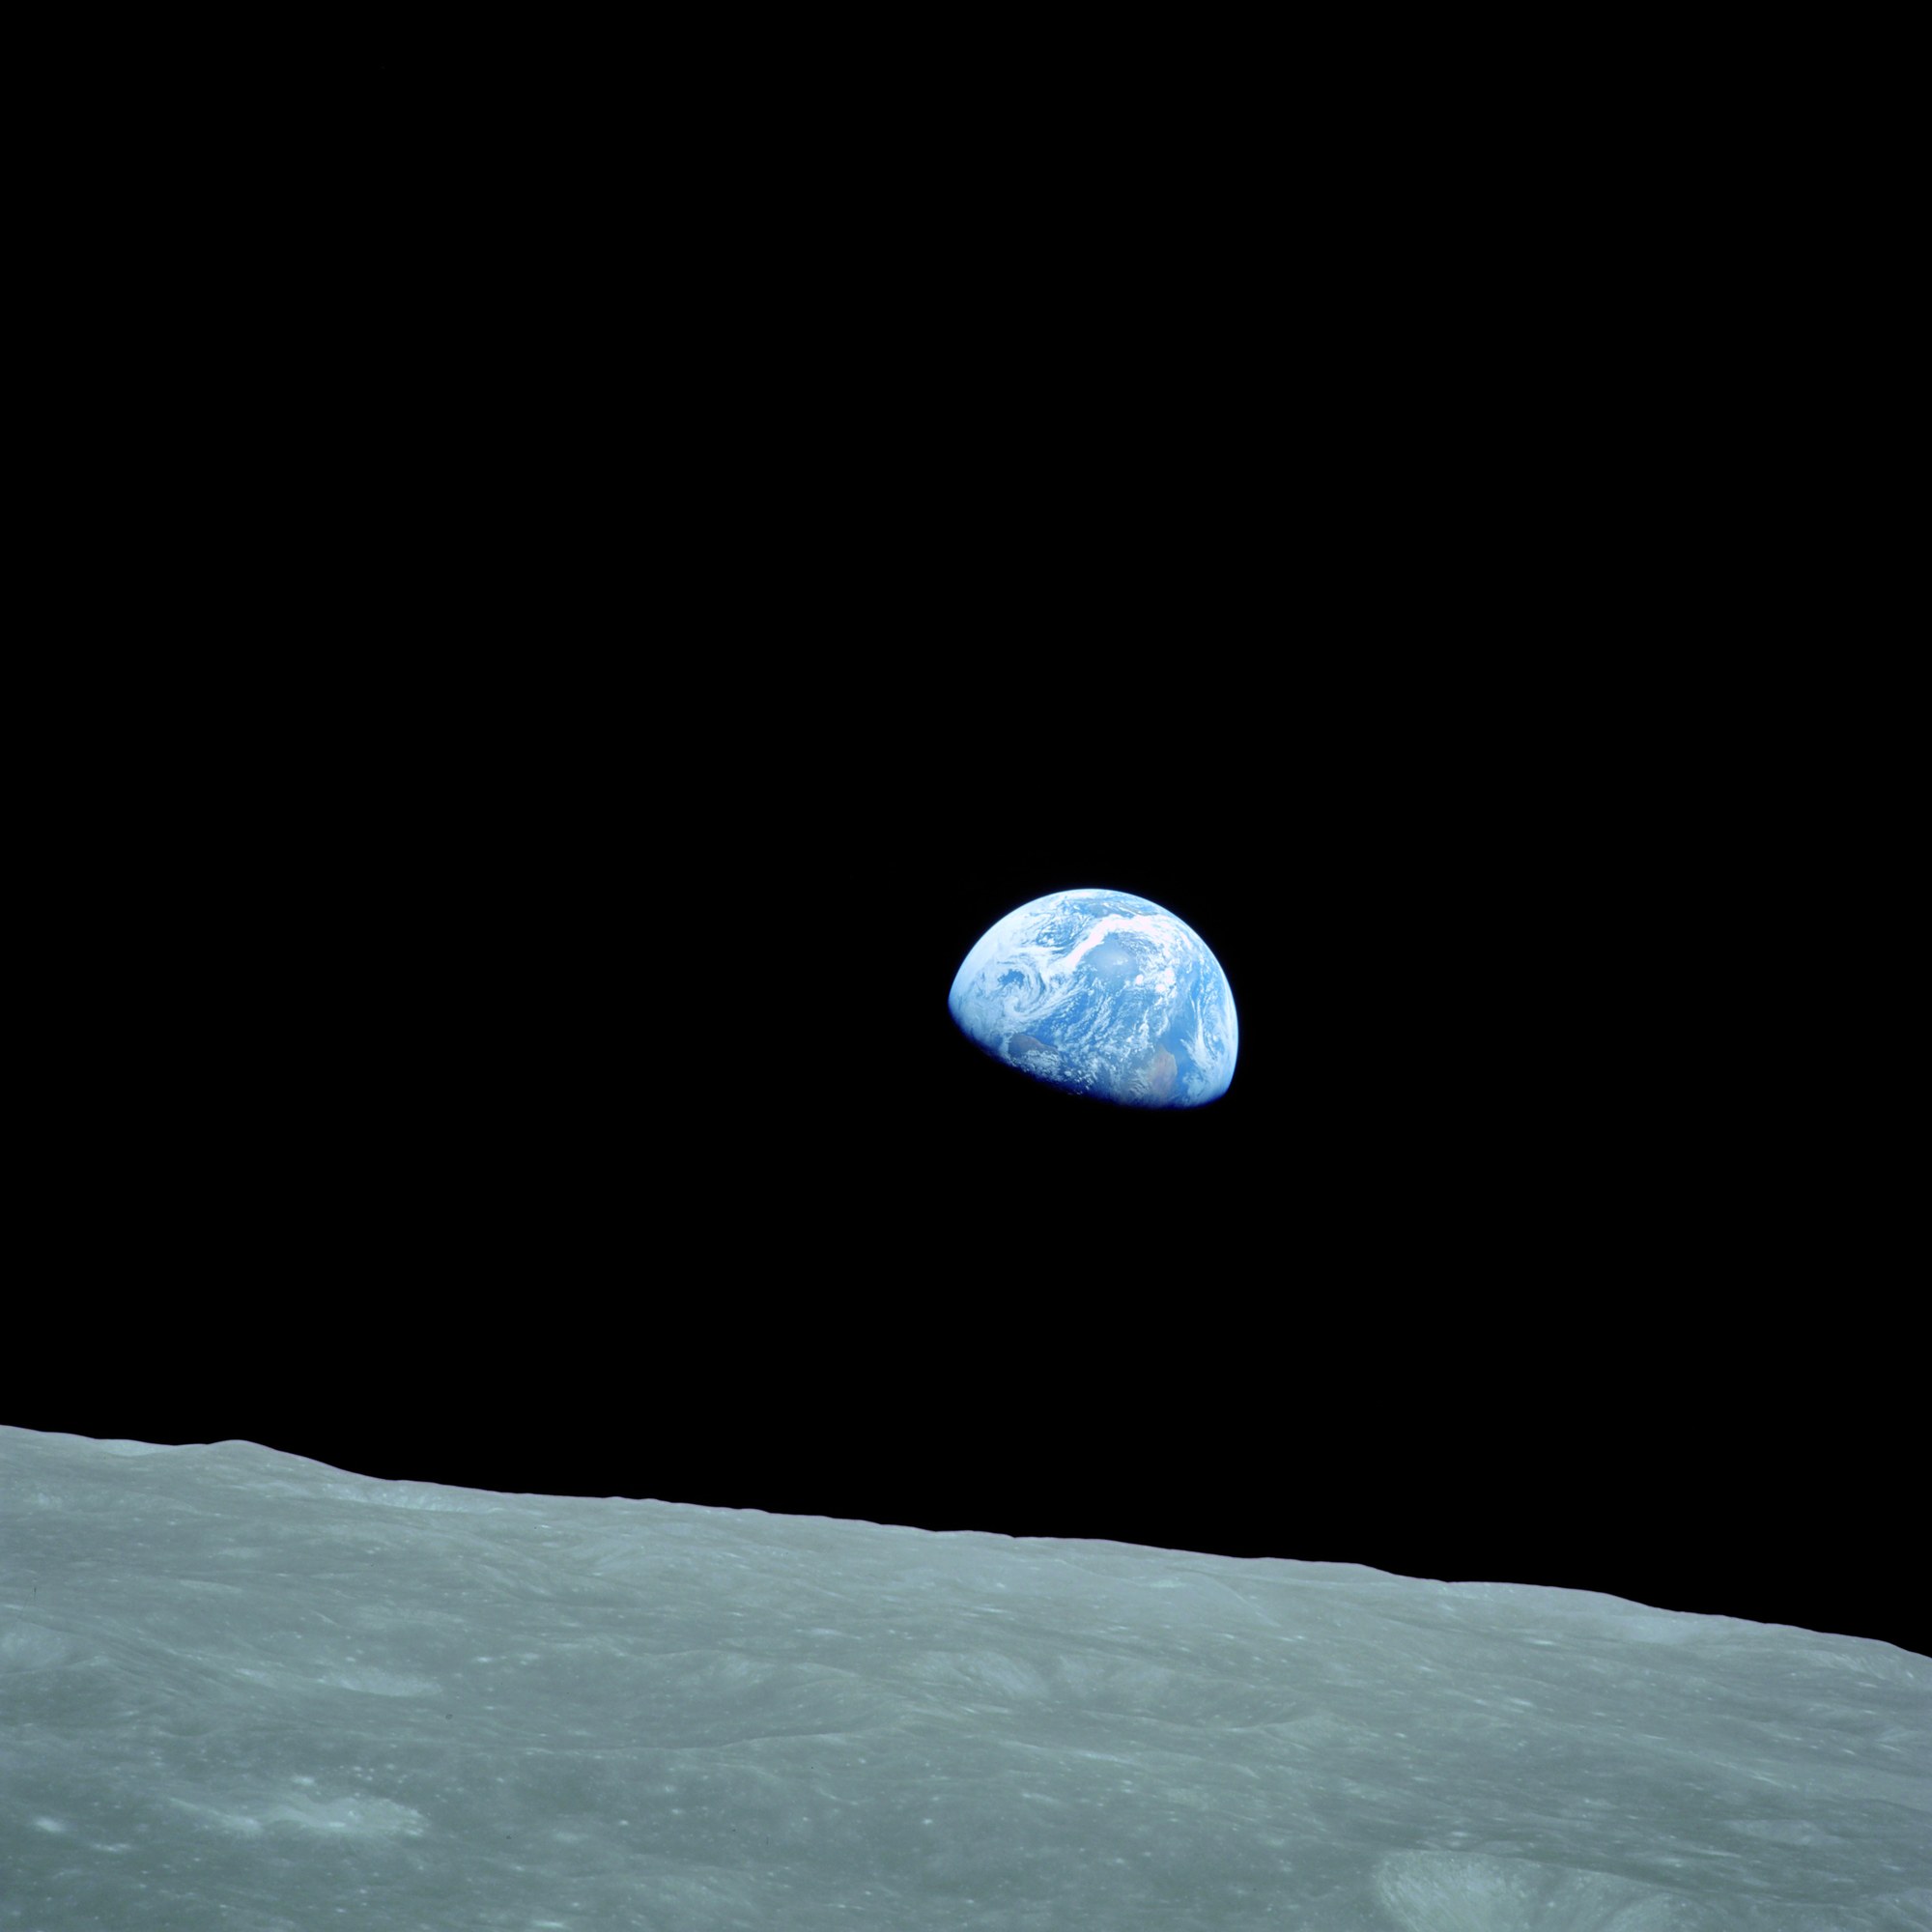 The Earth during the first lunar orbit